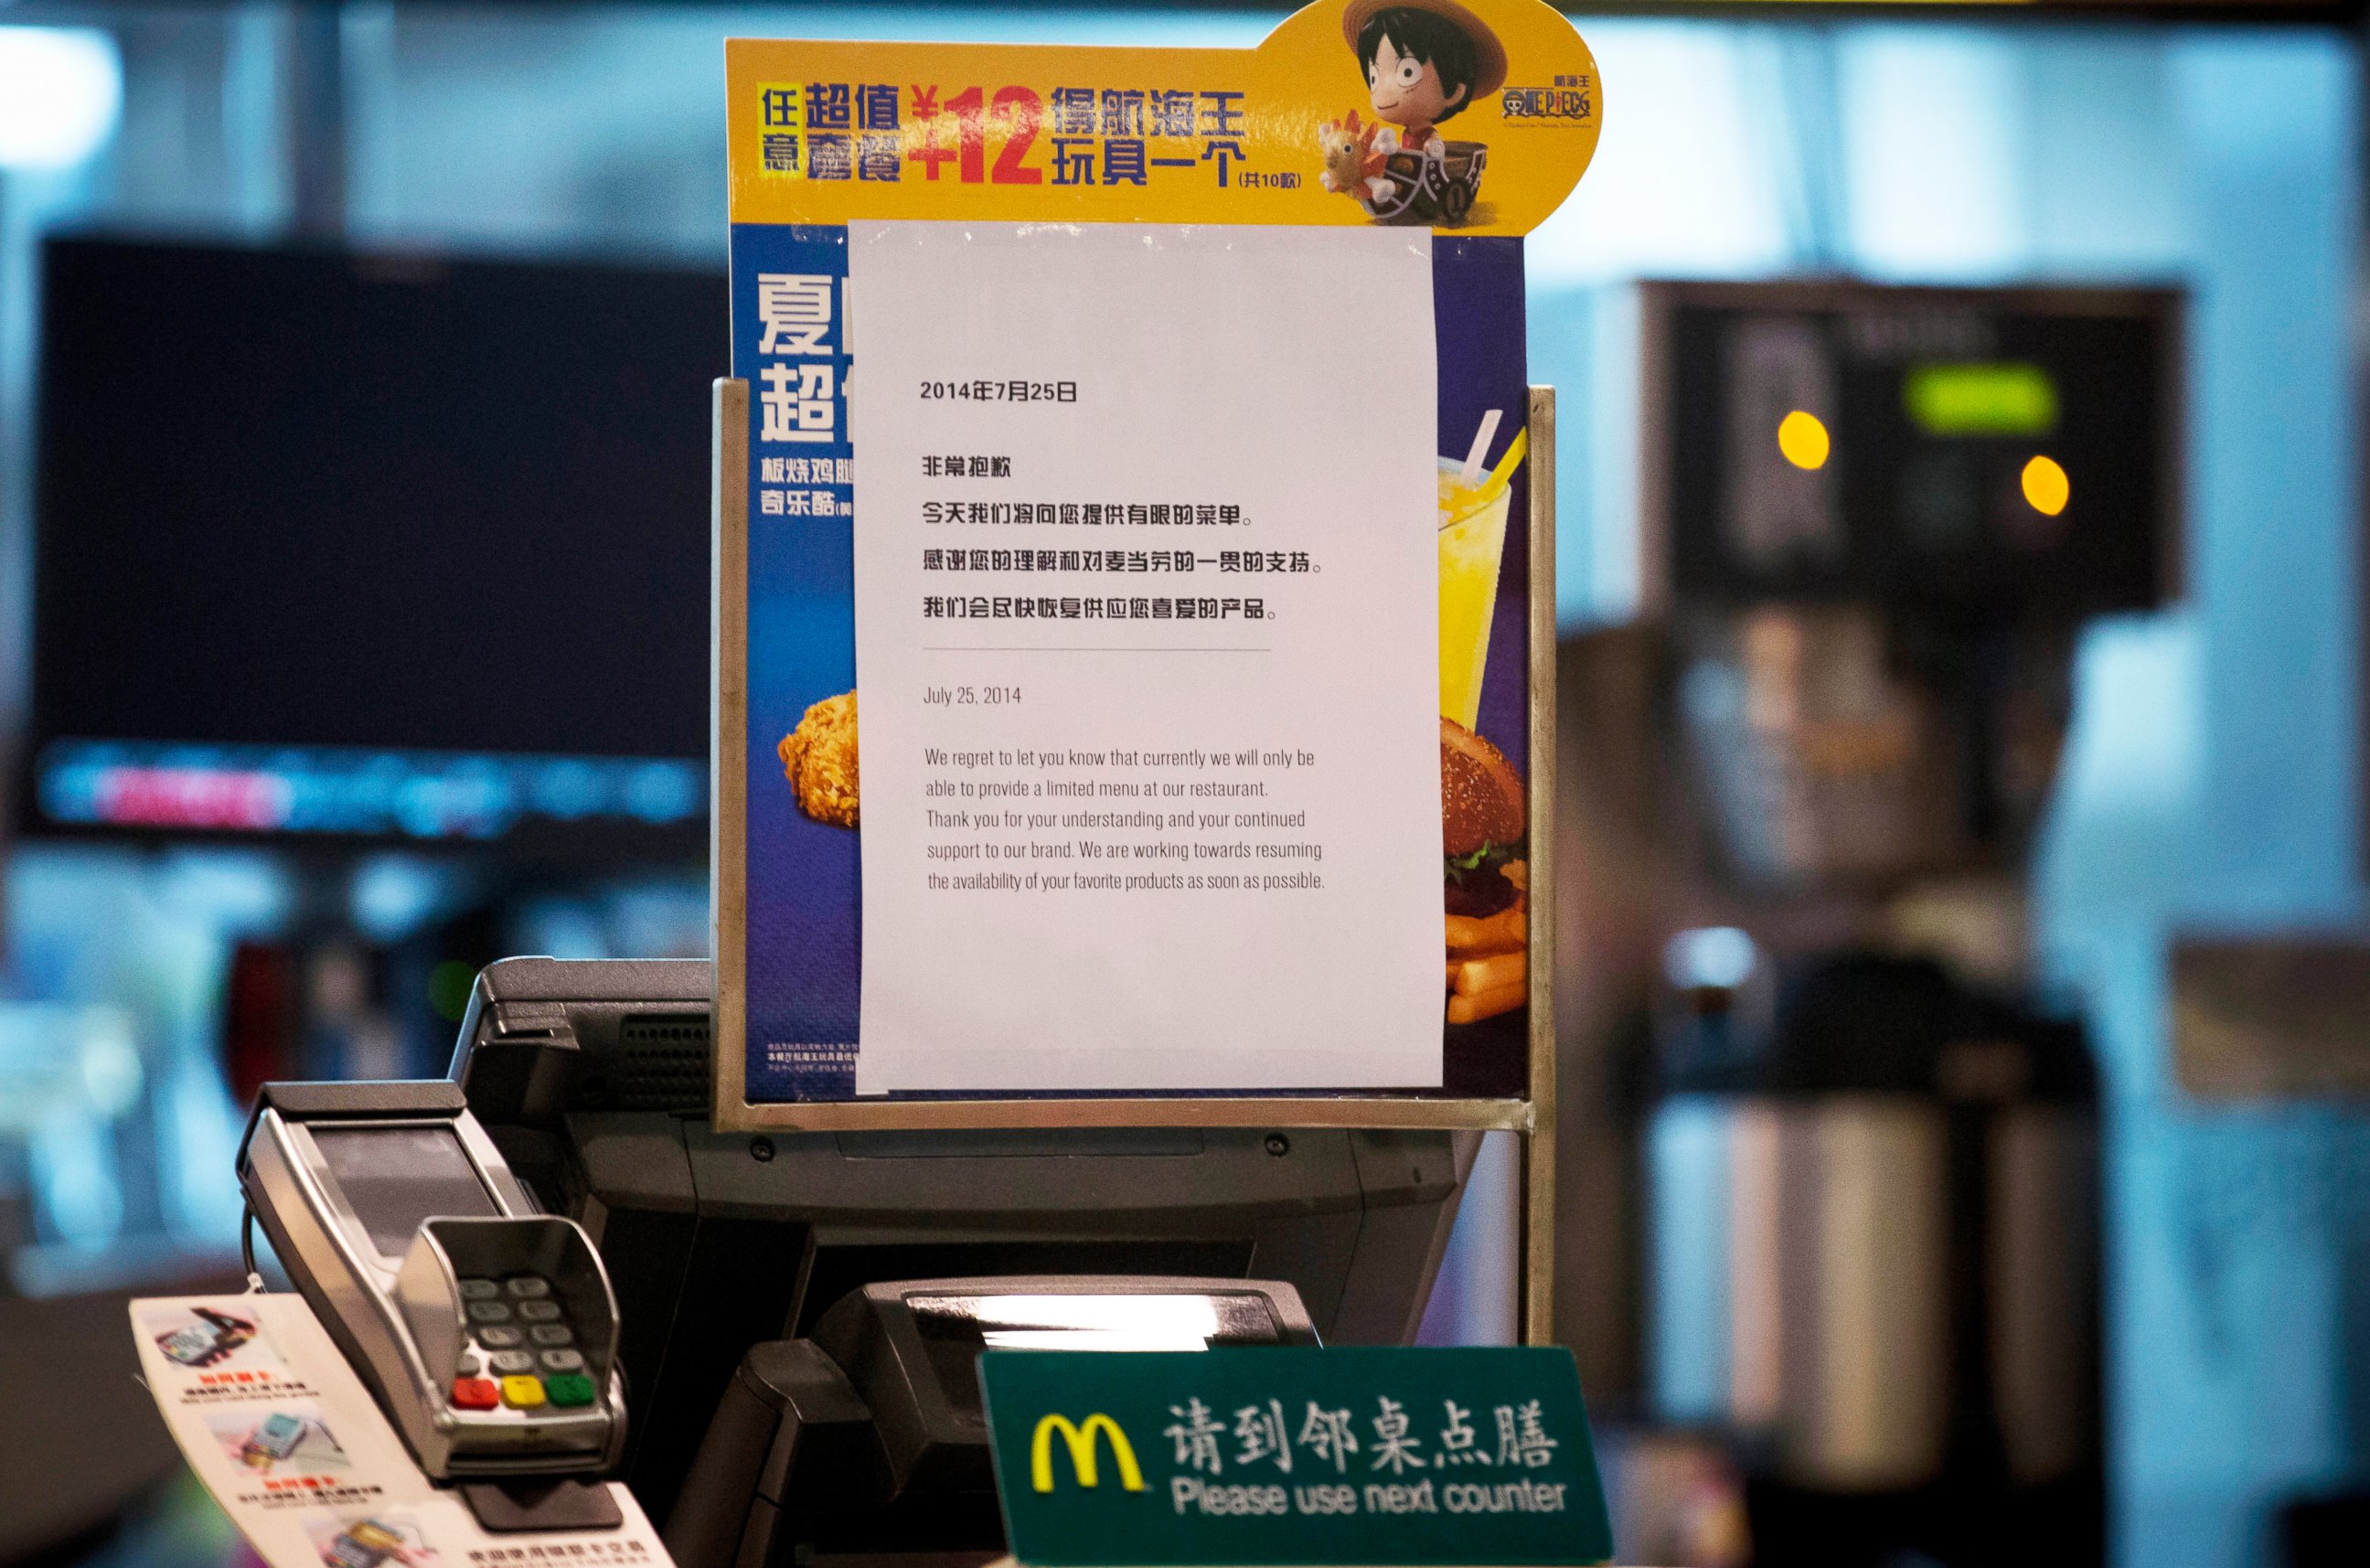 PHOTO: A notice is displayed at a cashier's counter of a McDonald's restaurant in Beijing, China on July 28, 2014. 